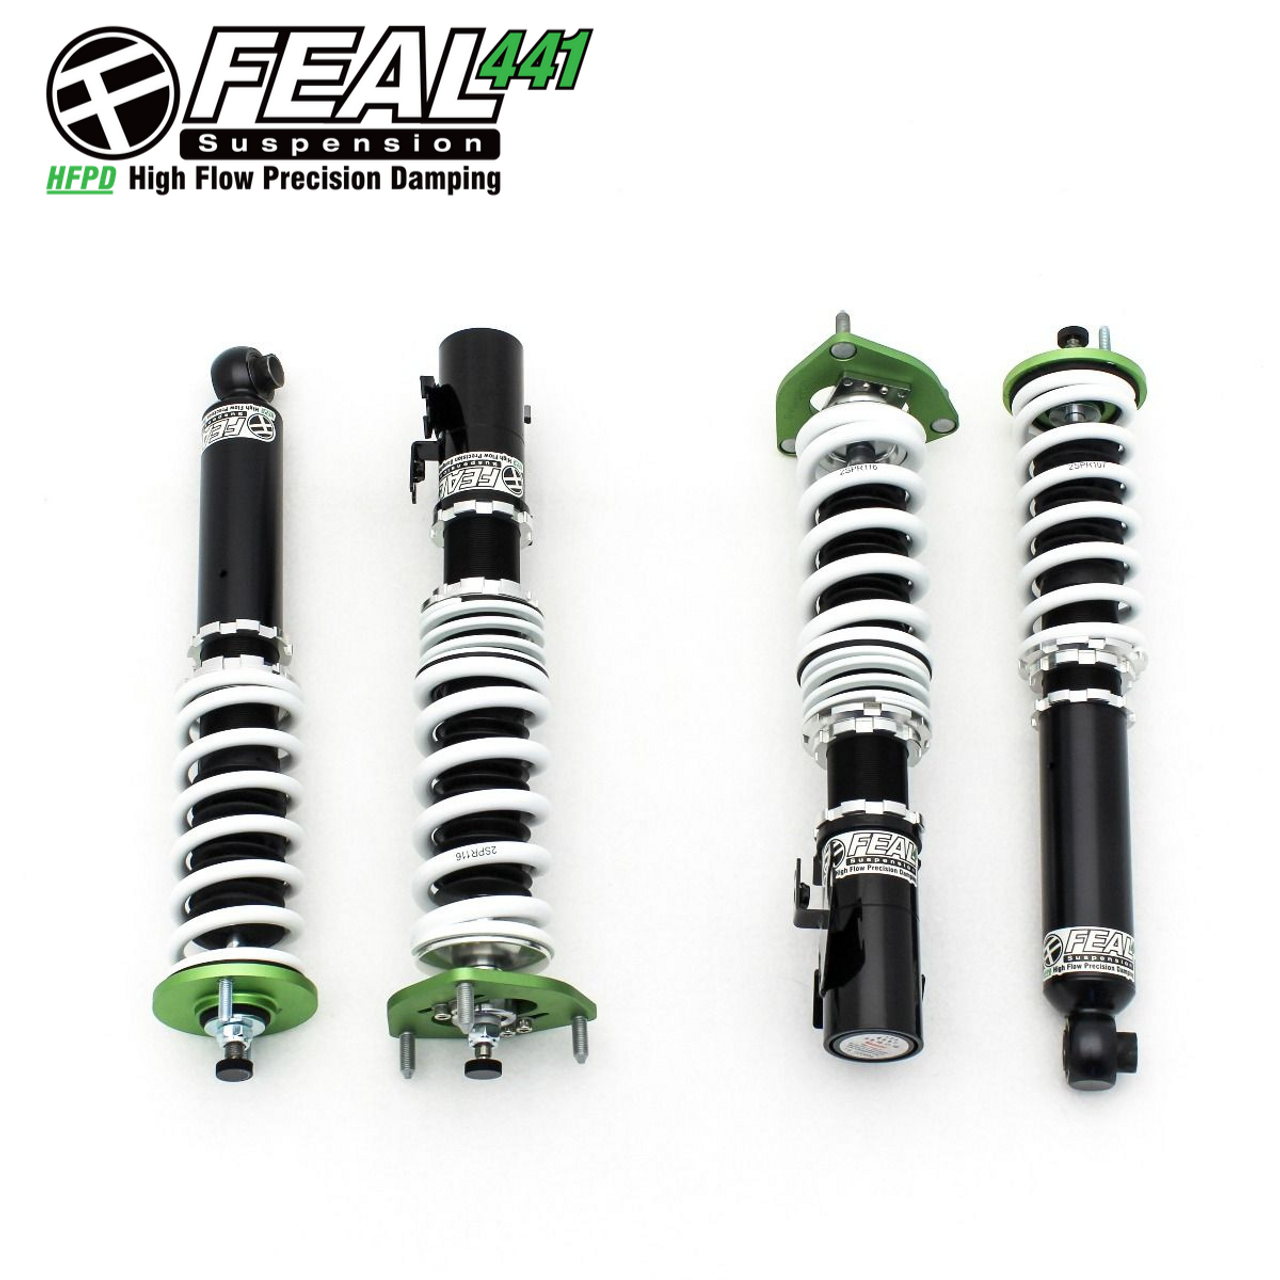 Feal Suspension 441 Coilover Kit, AWD - Infiniti G37